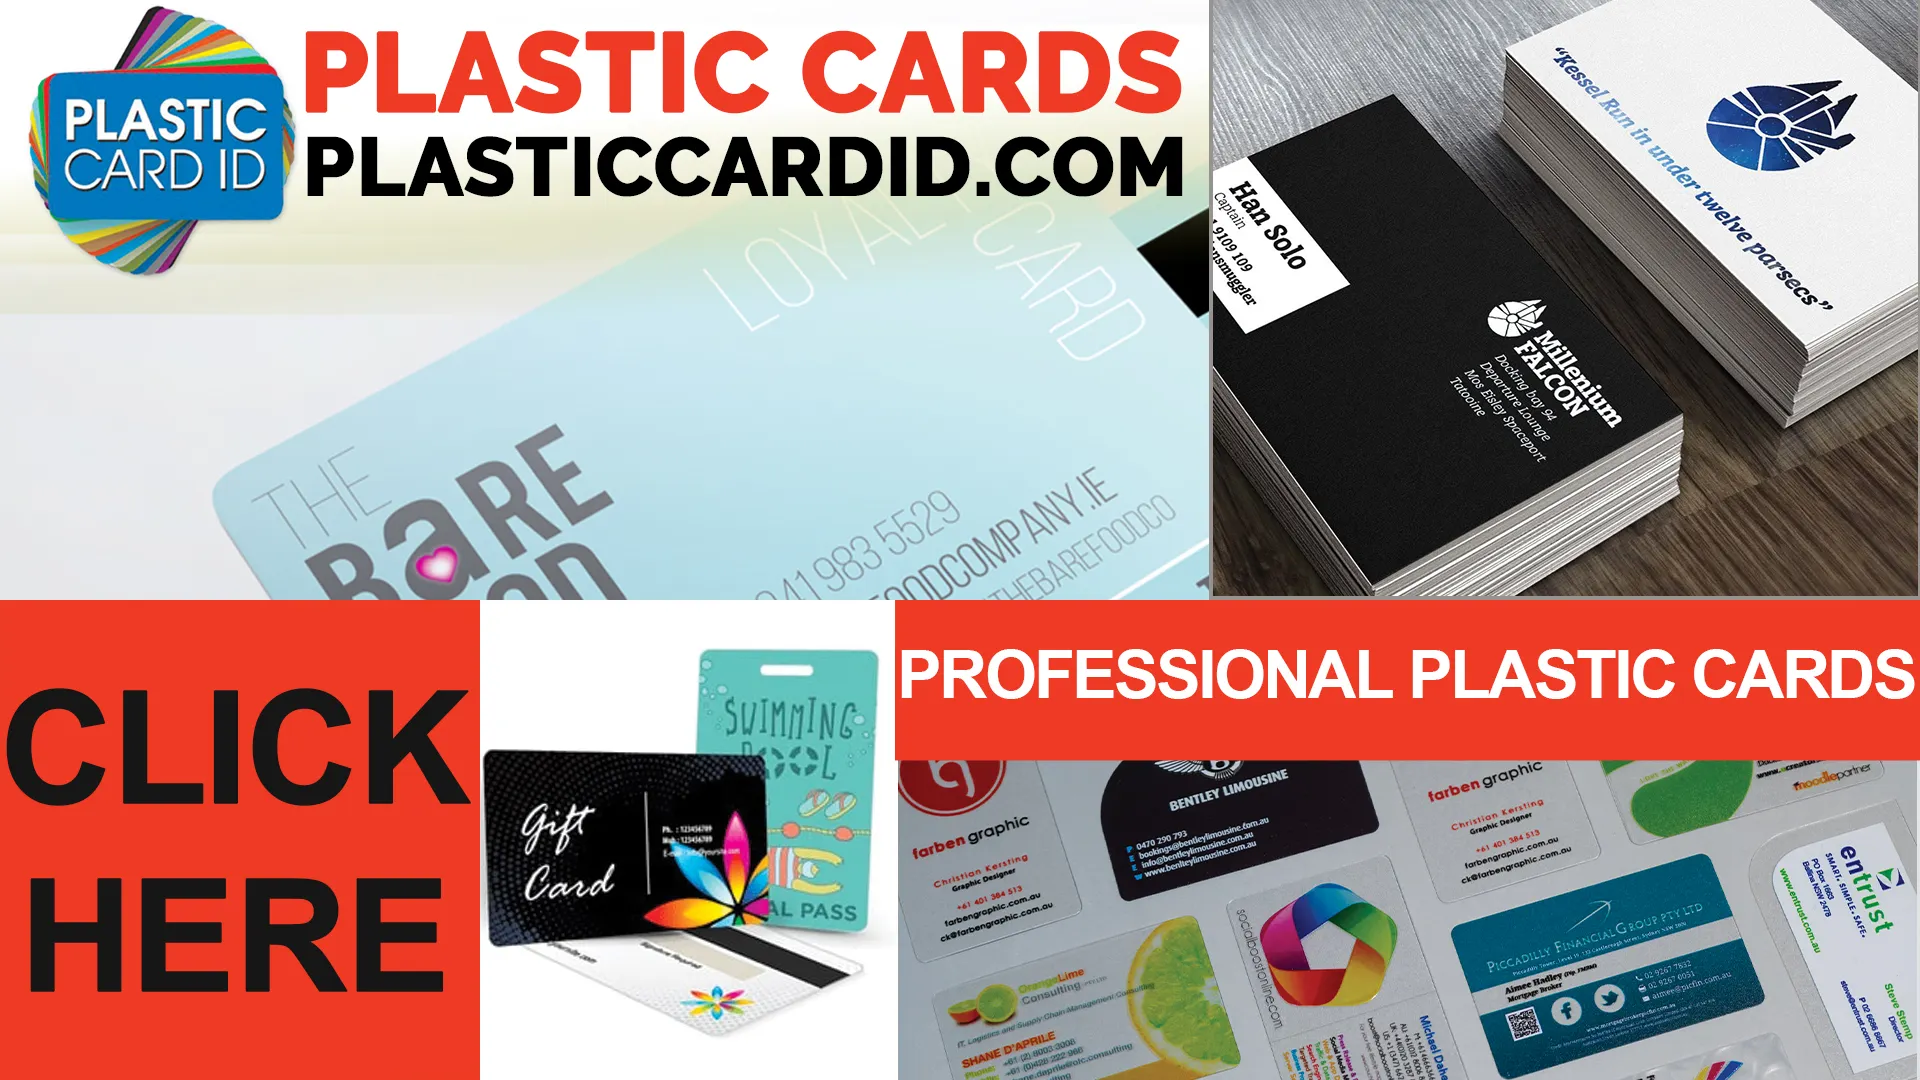 Durability and Reliability-A Commitment from Plastic Card ID
